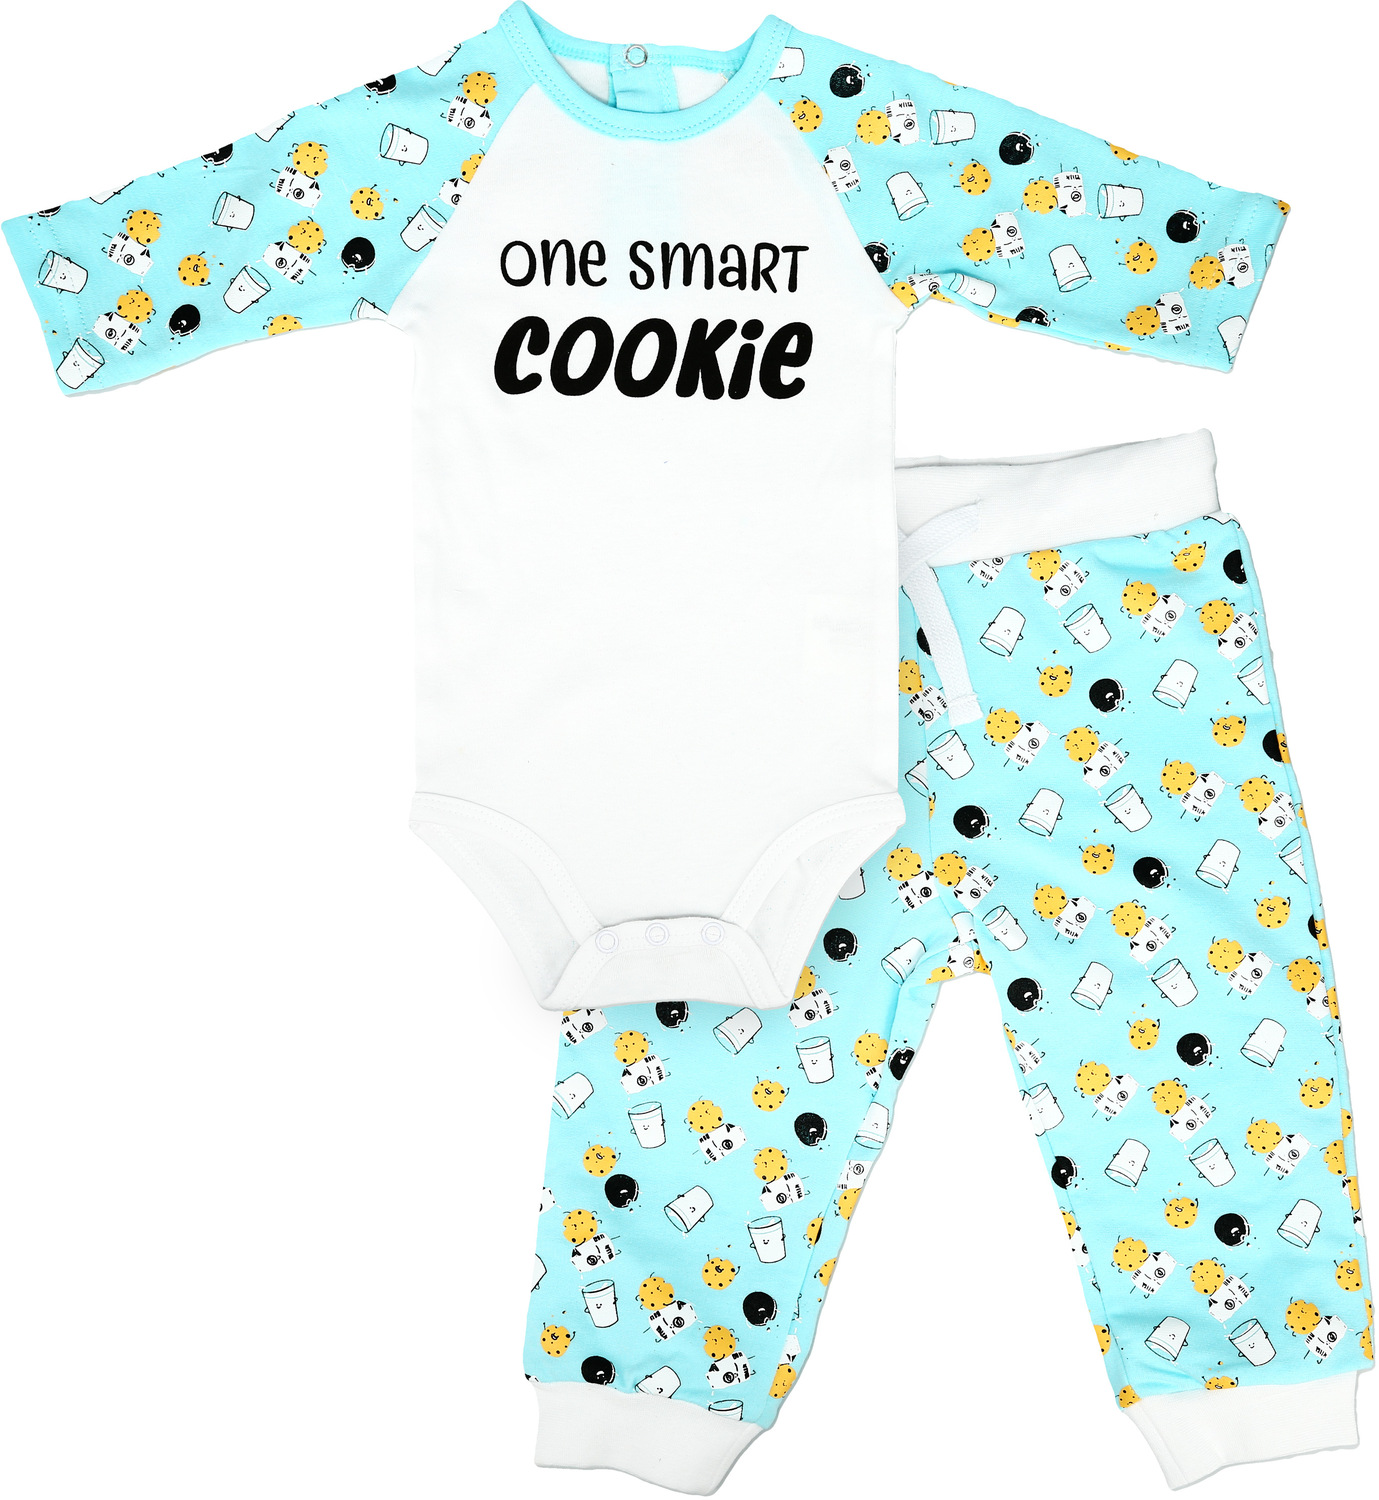 Smart Cookie by Late Night Snacks - Smart Cookie - 6-12 Months
Light Blue Bodysuit & Pants Set